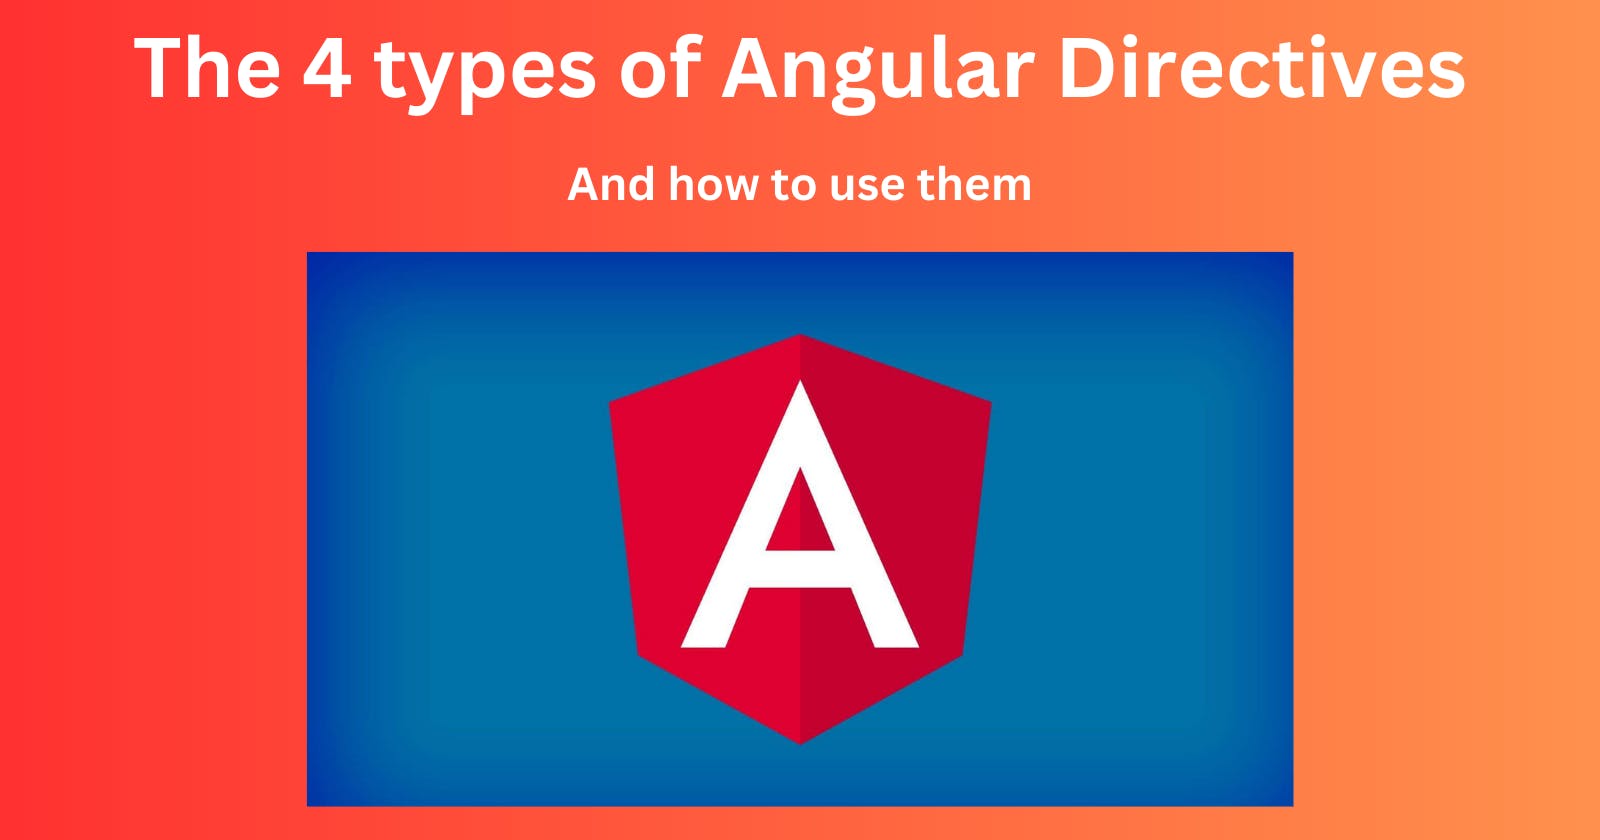 The 4 types of Angular Directives